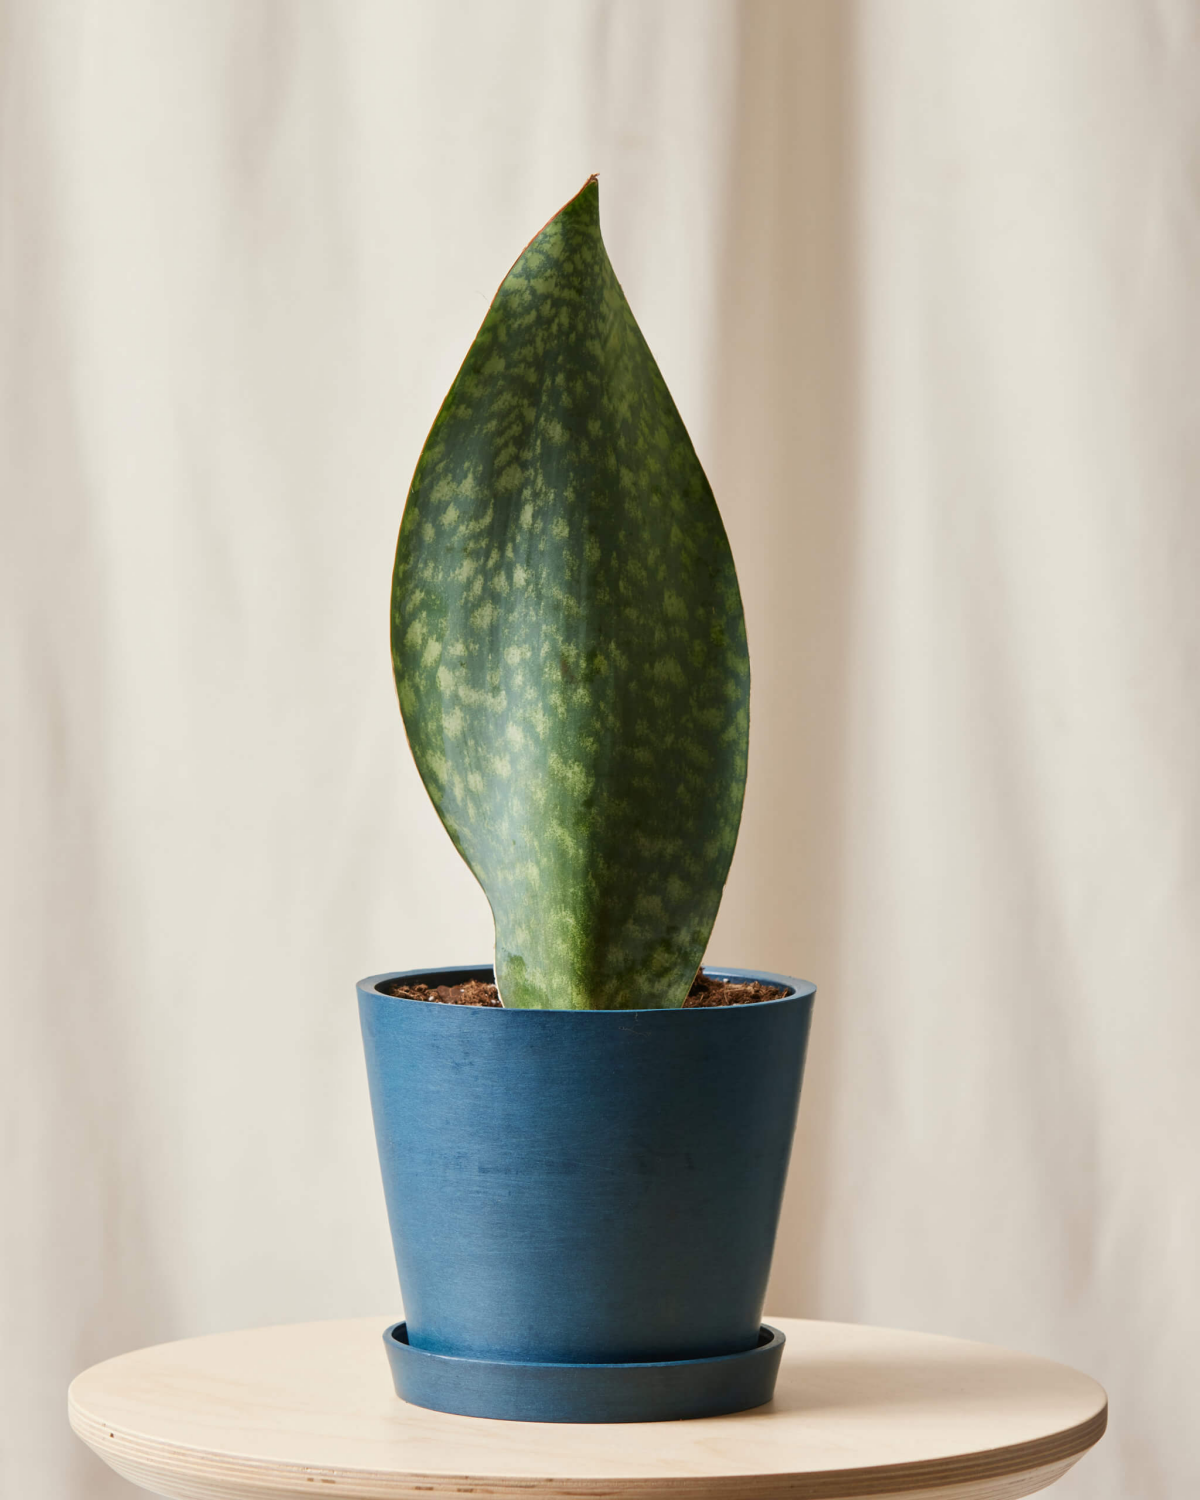 whale fin snake plant